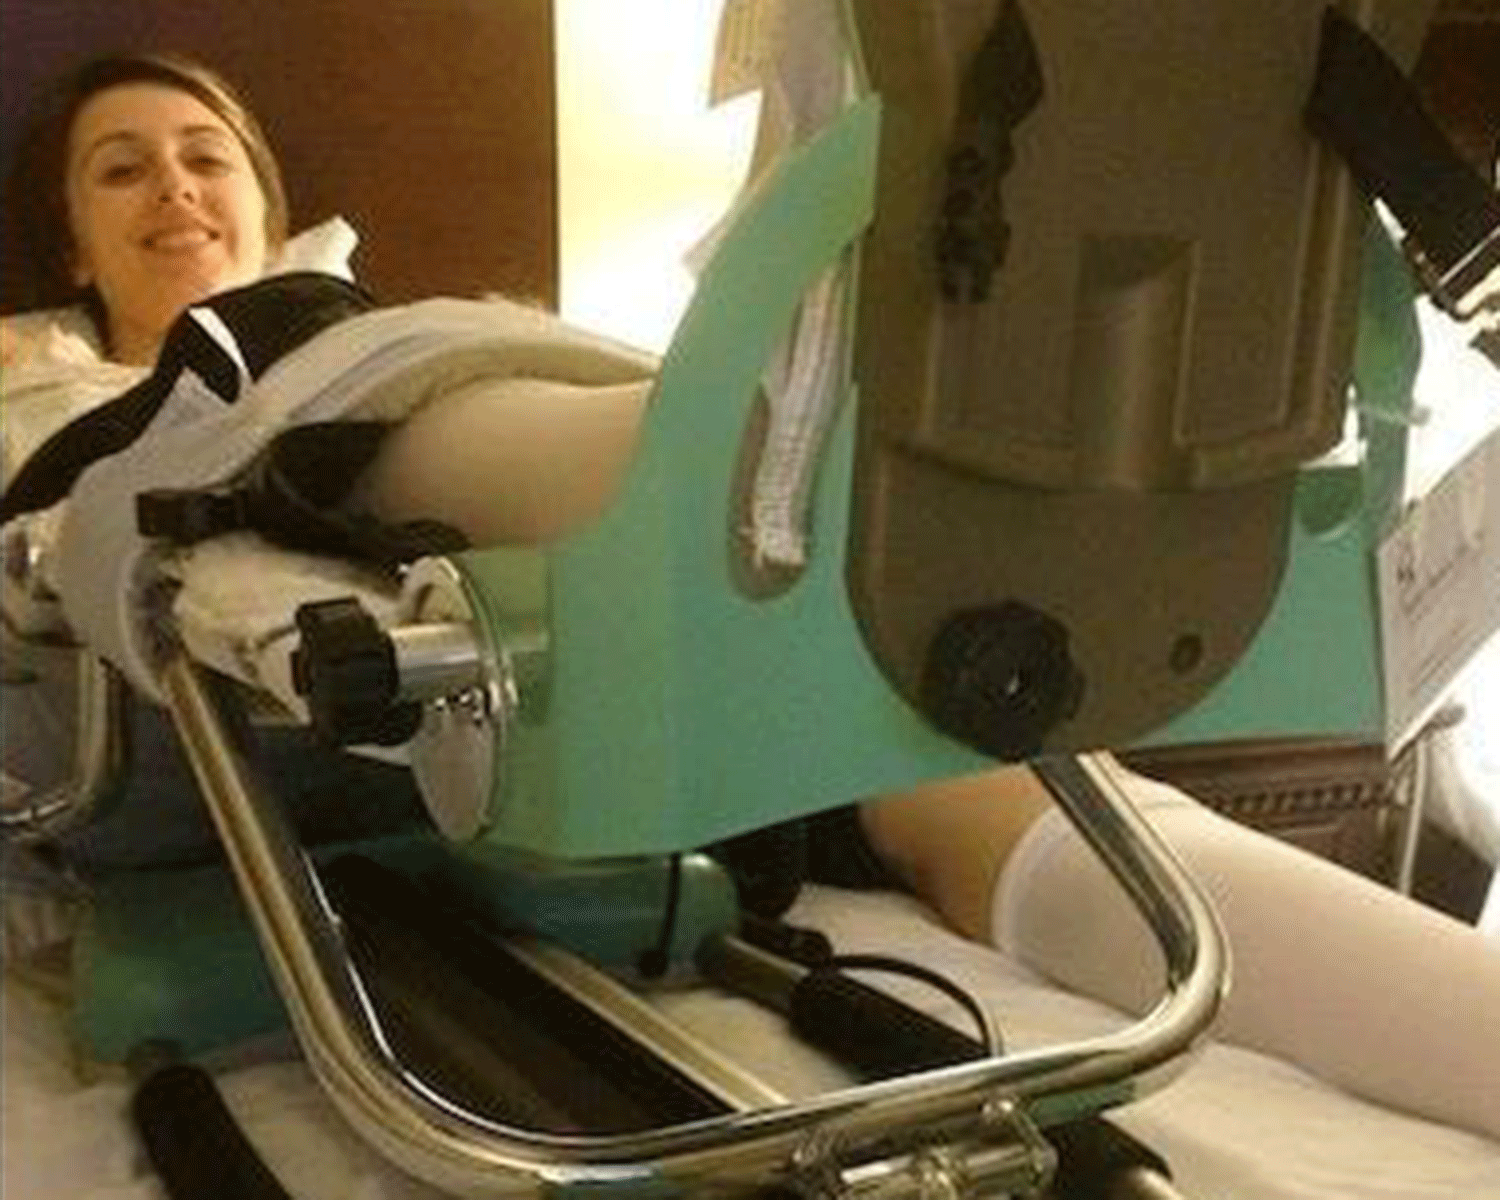 Ms Rose spent time in a wheelchair, on crutches and in a machine for her legs six hours a day